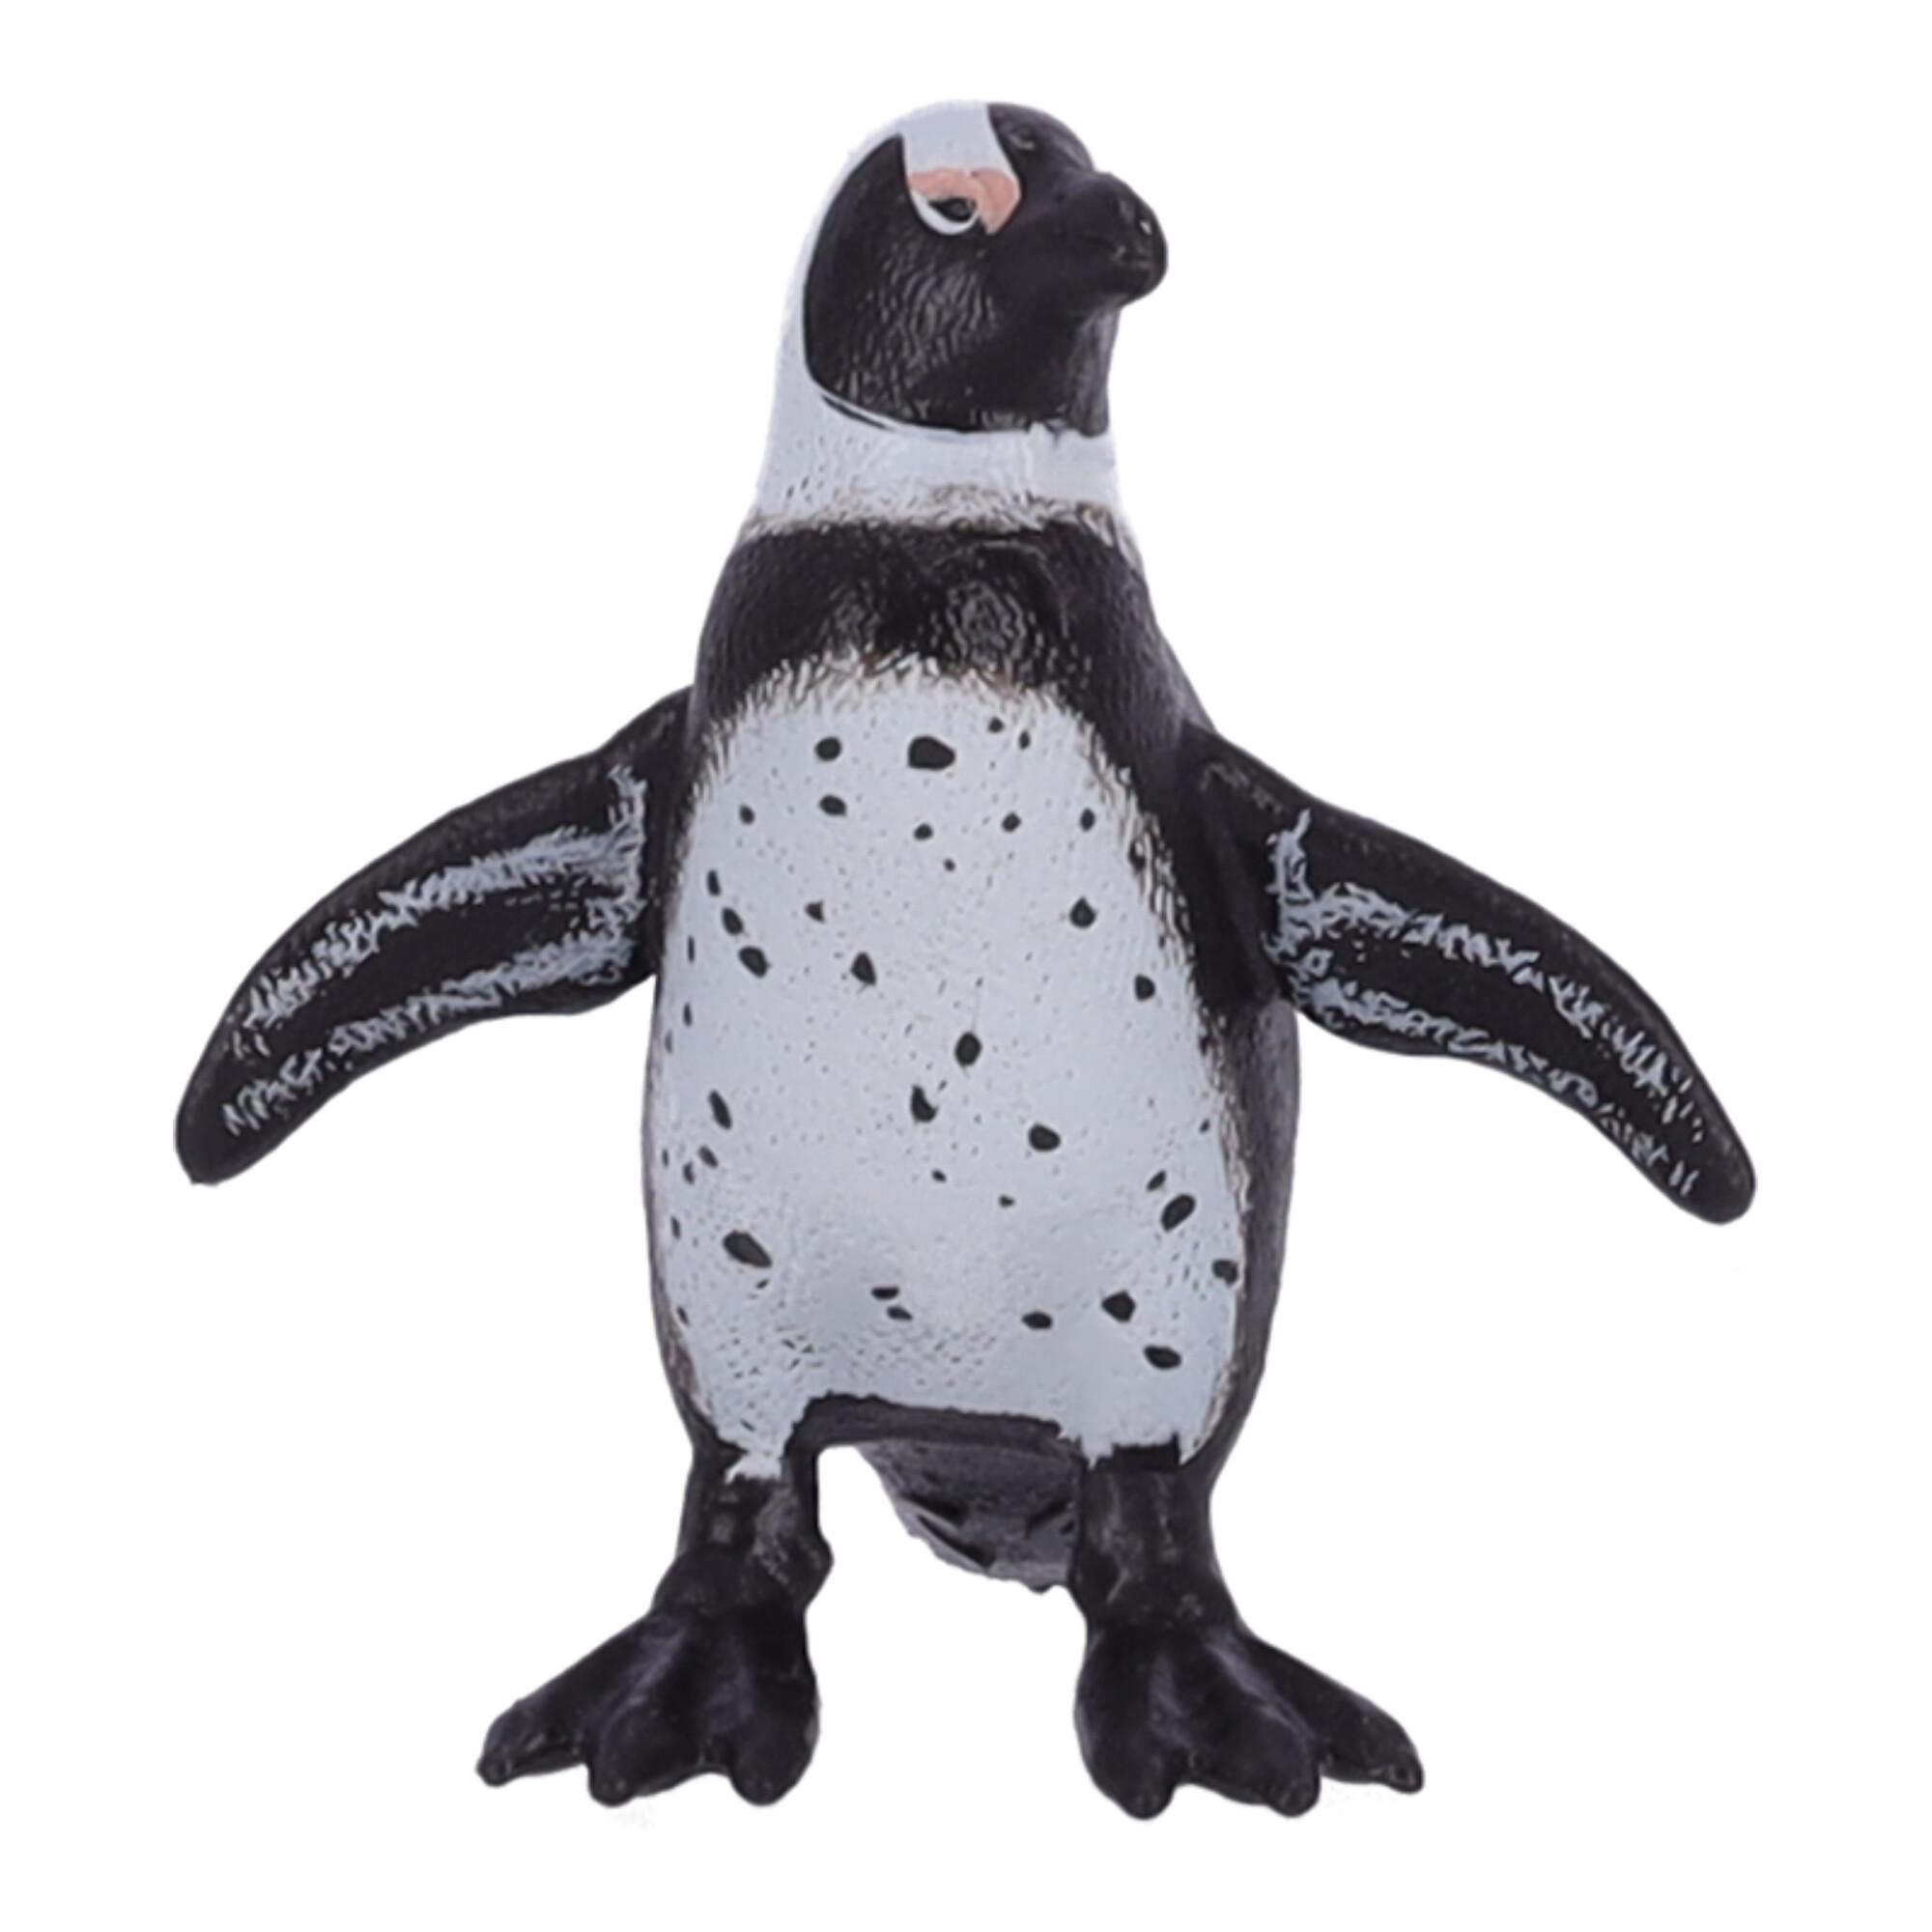 Collectible figurine Pengwin, Papo